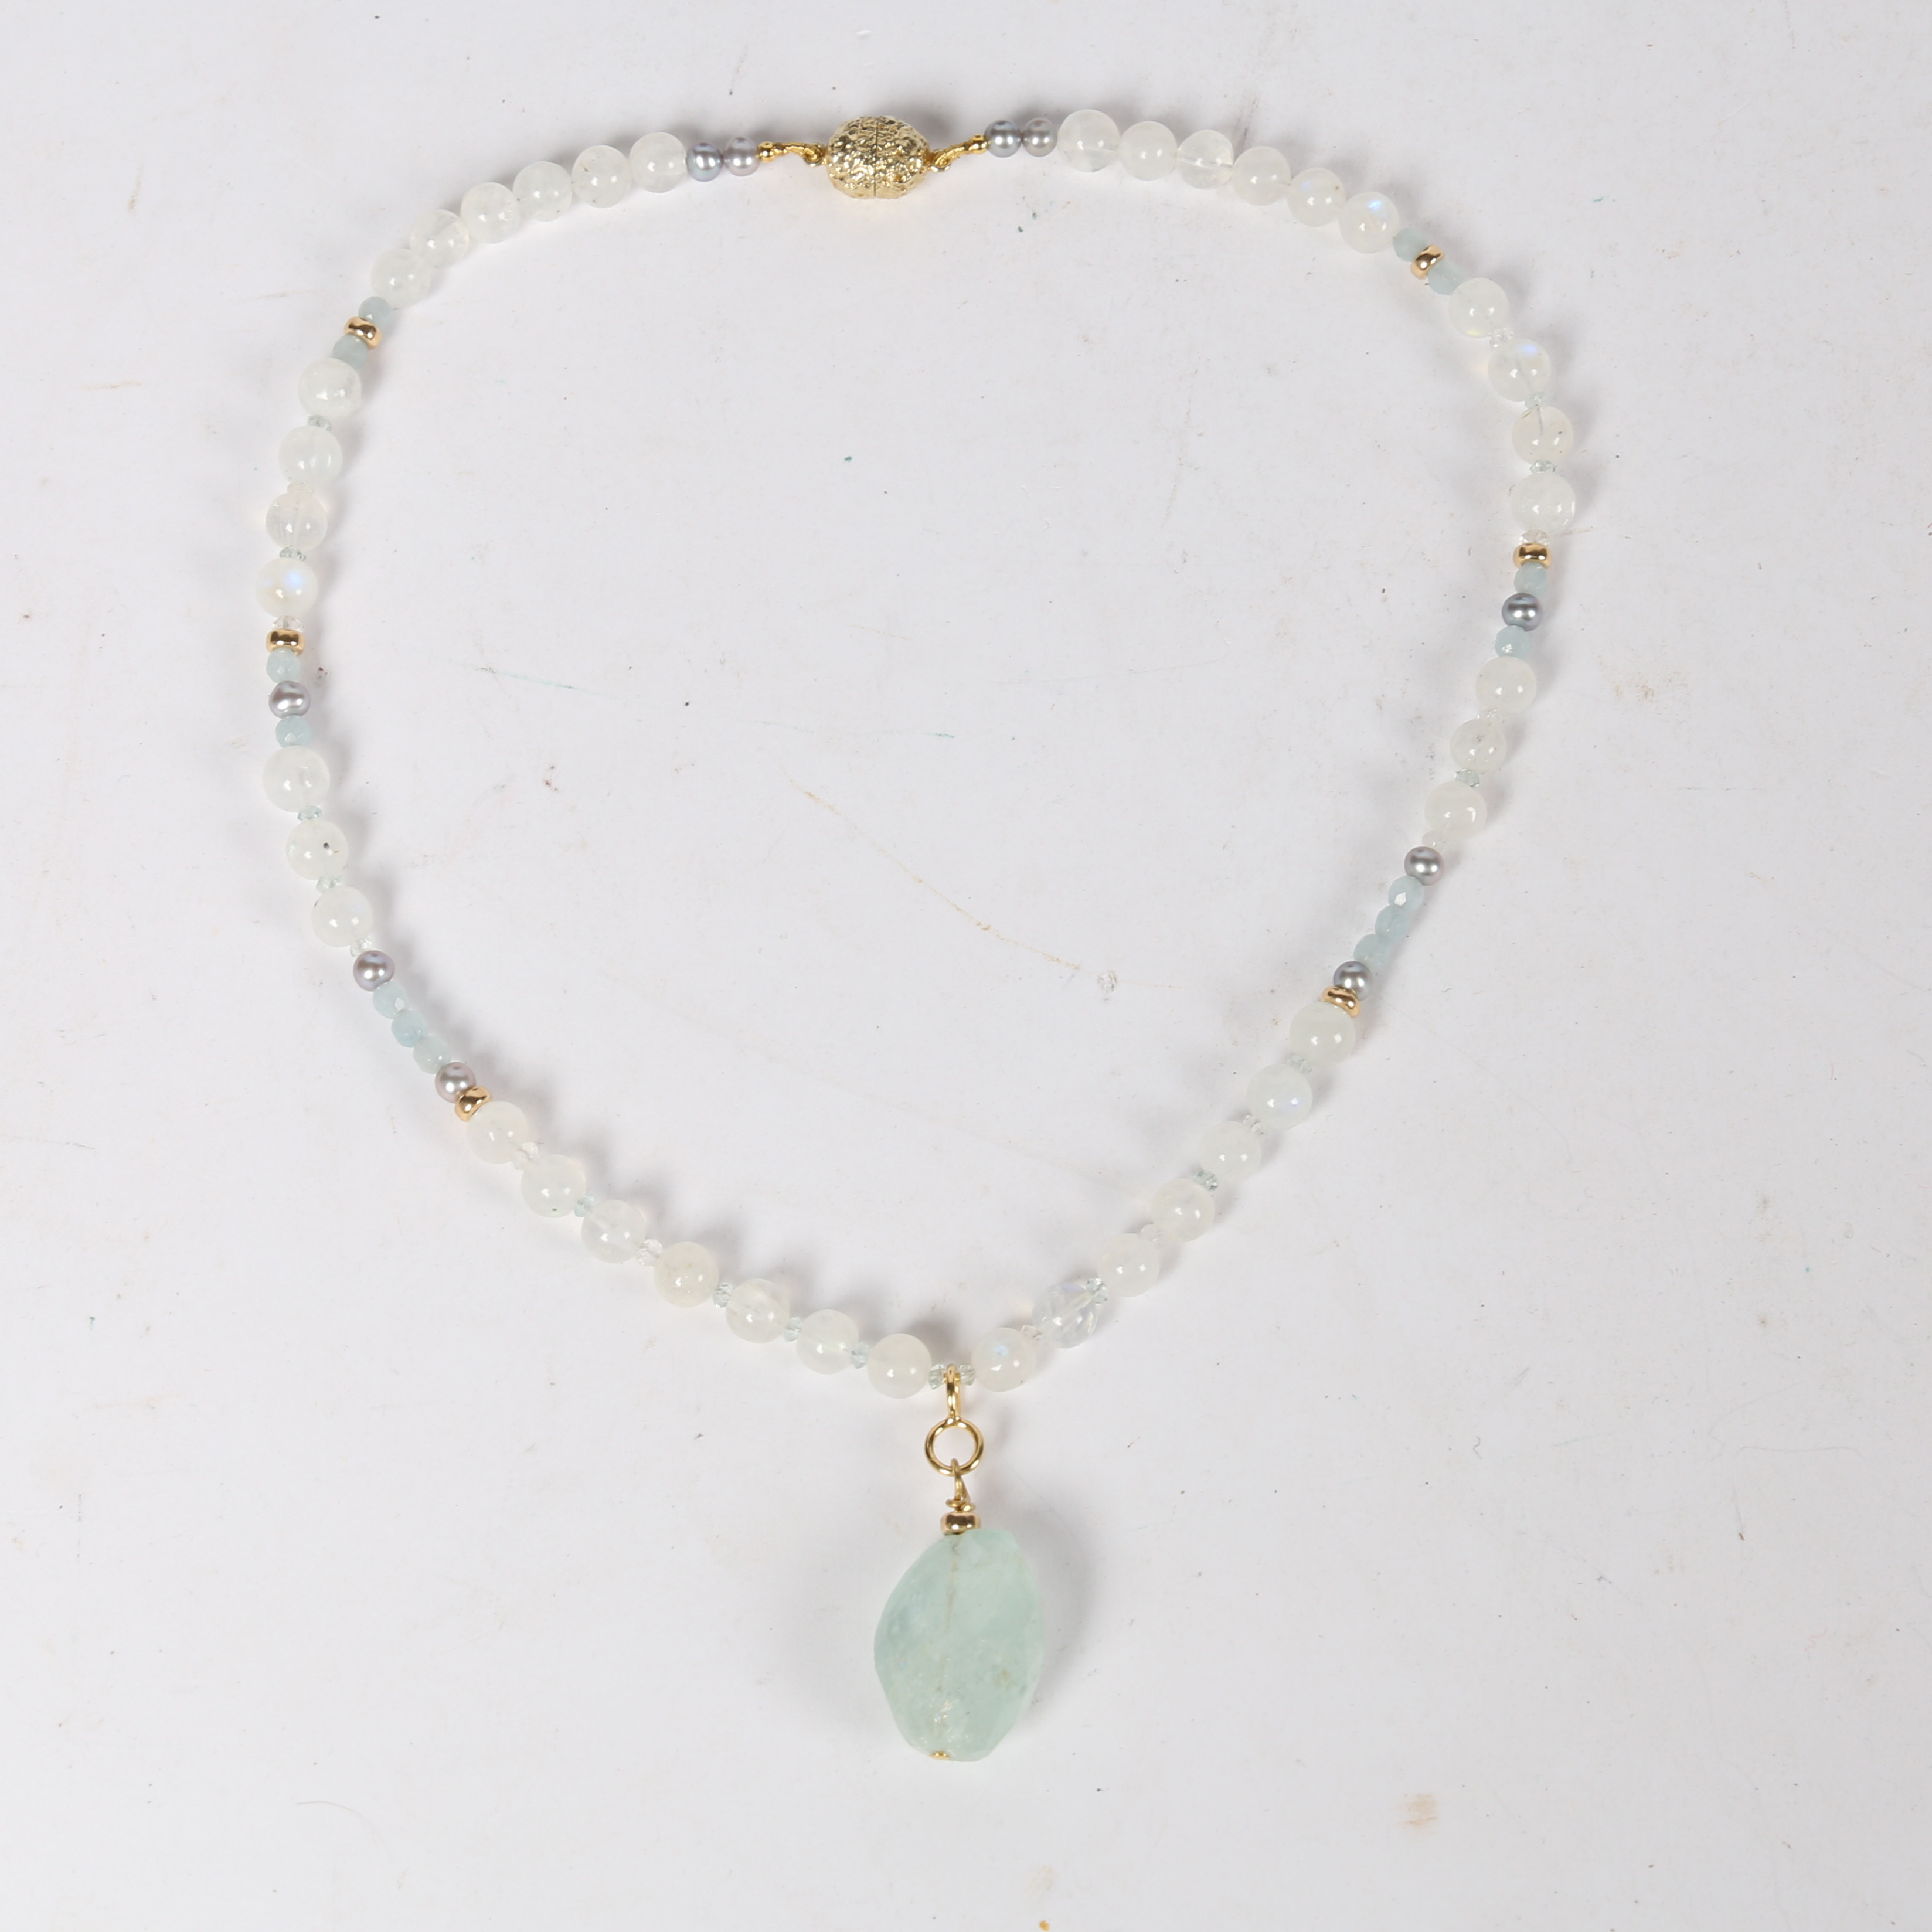 A UNIQUE ONE-OF-A-KIND MOONSTONE NECKLACE - Image 2 of 10